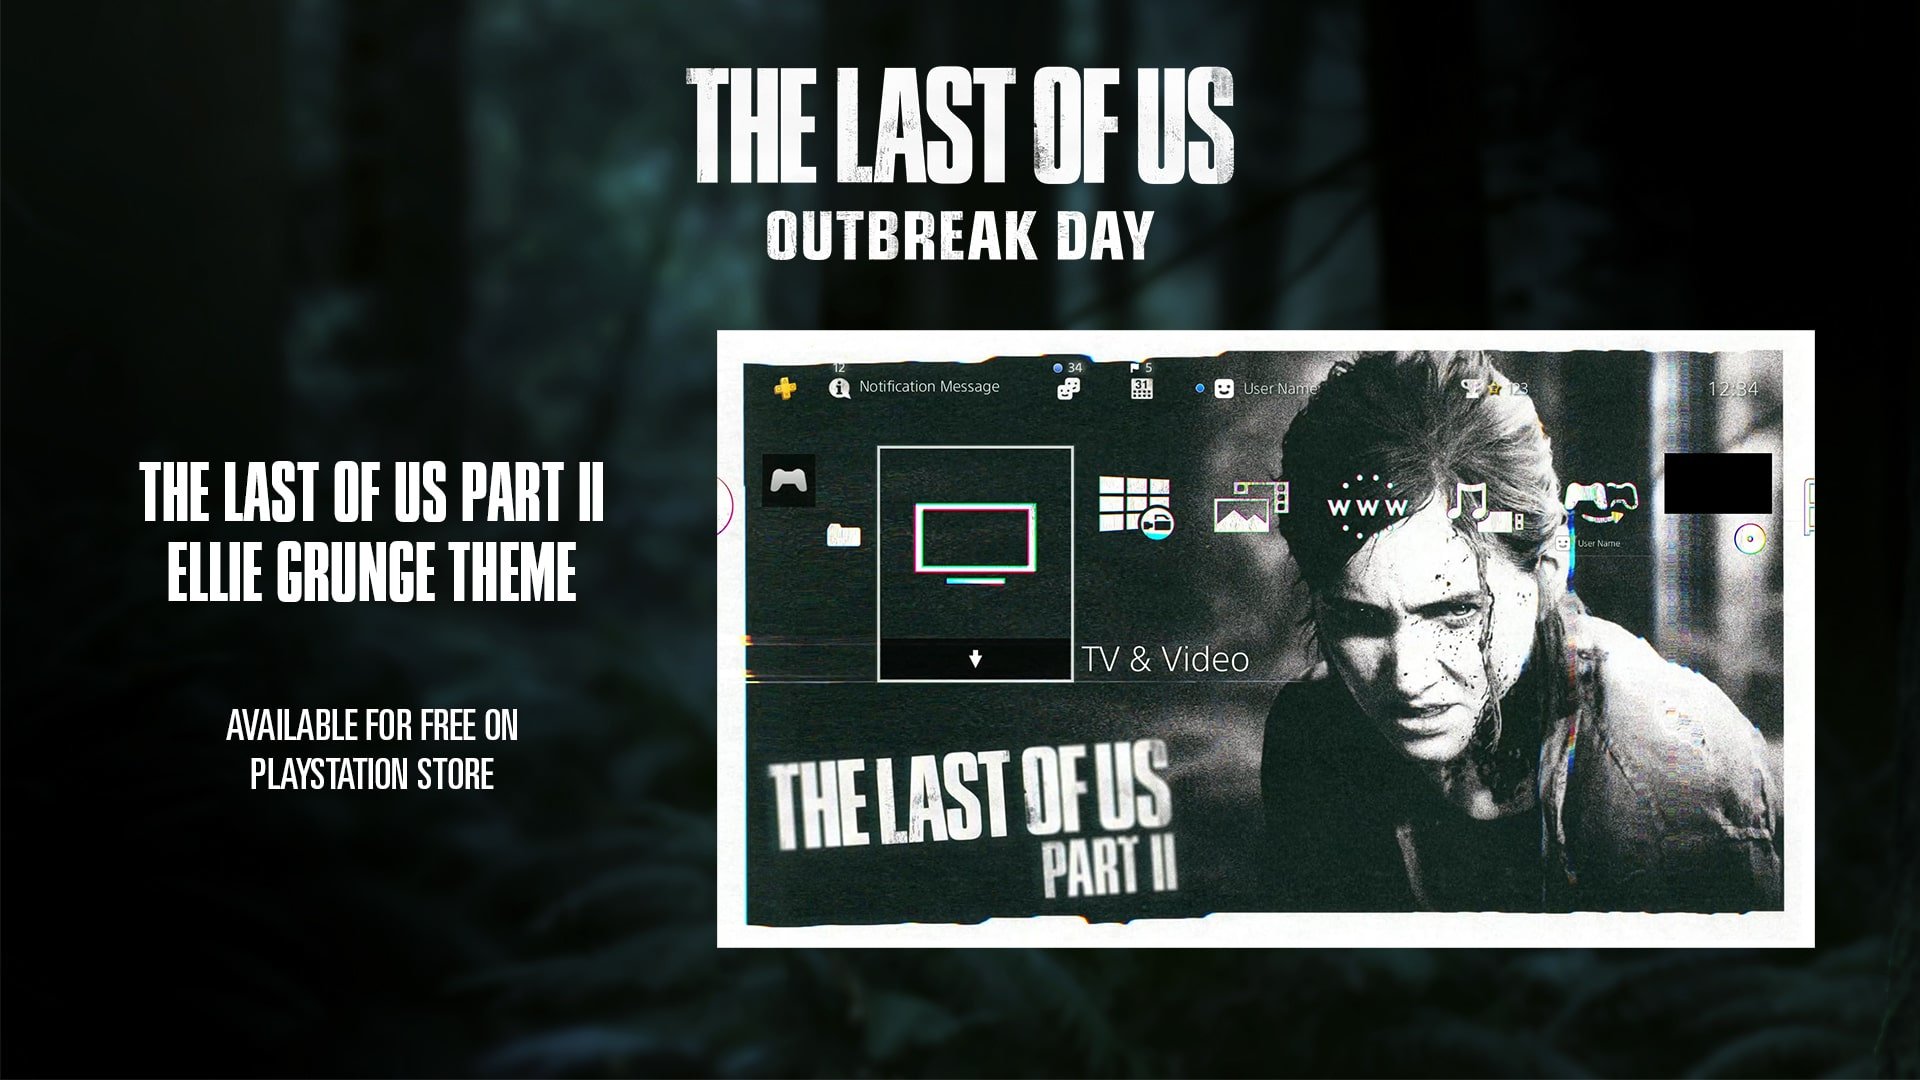 The Last of Us Day: Naughty Dog celebra a data com brindes